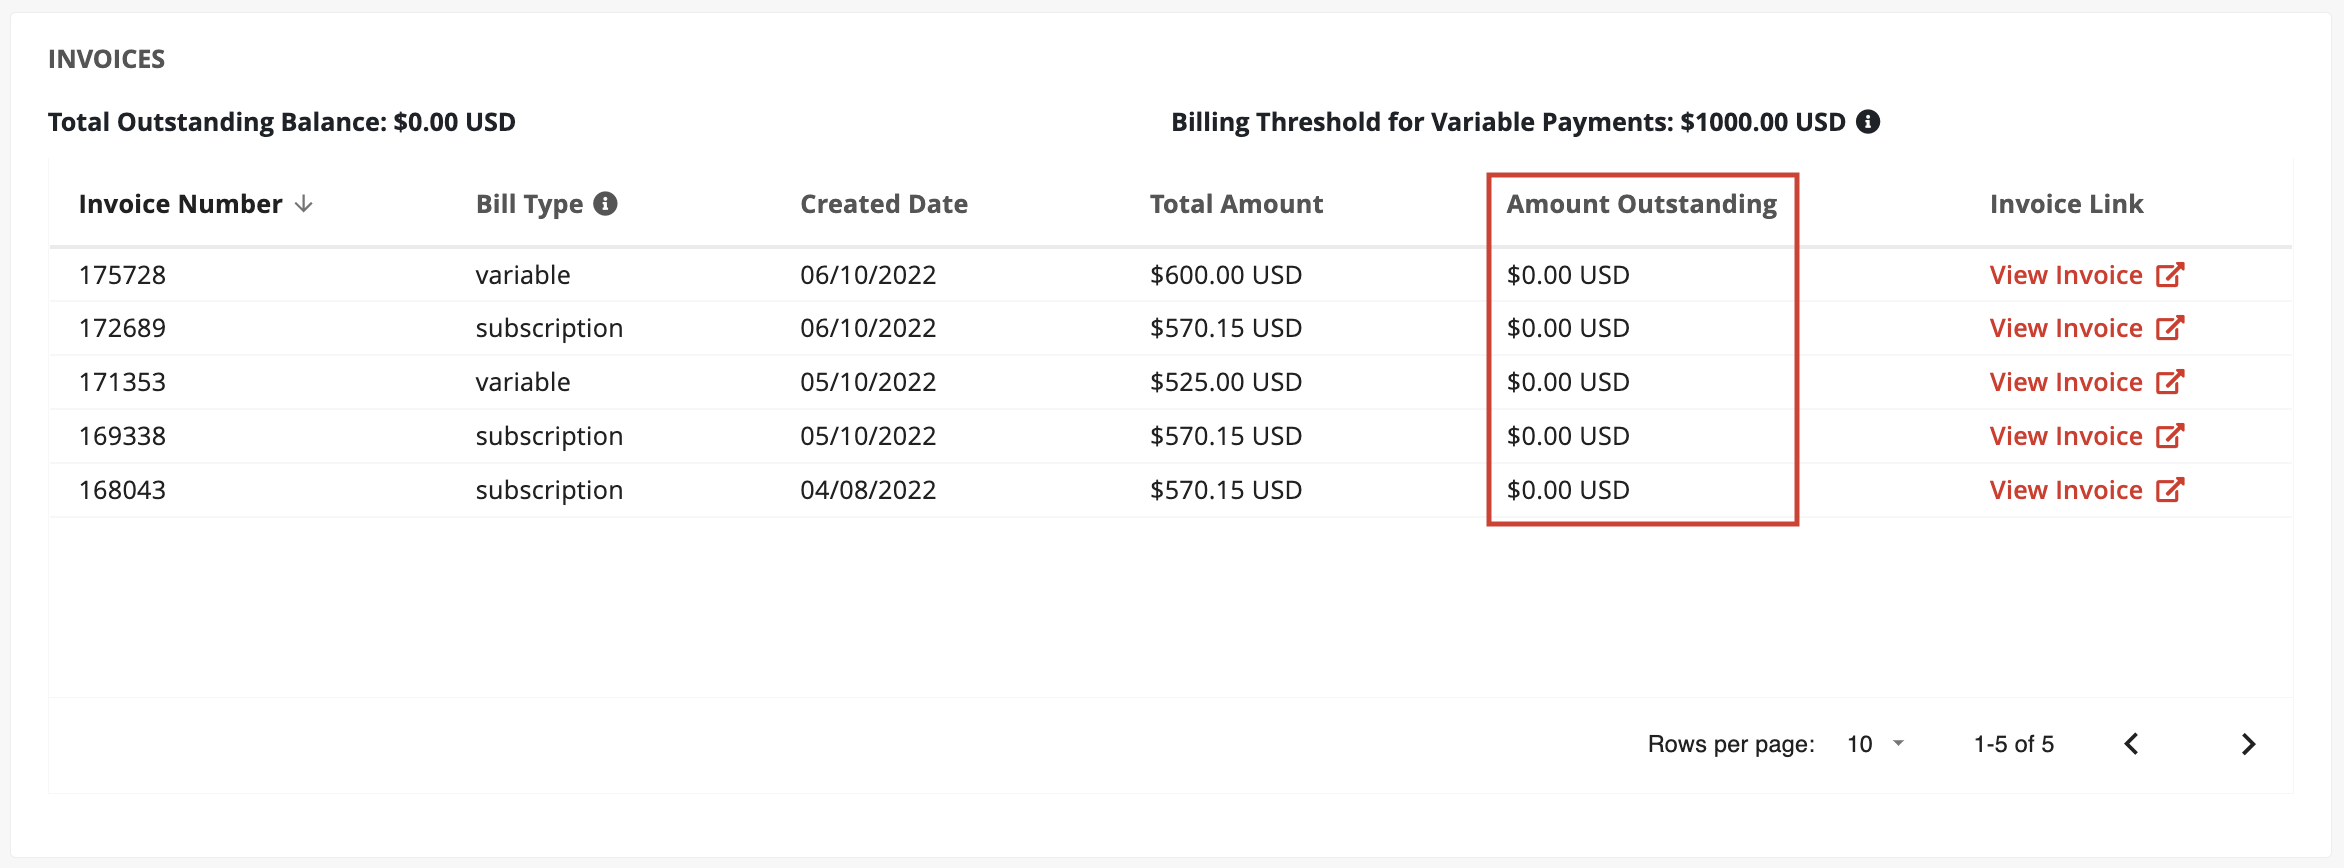 Invoices-Table.png